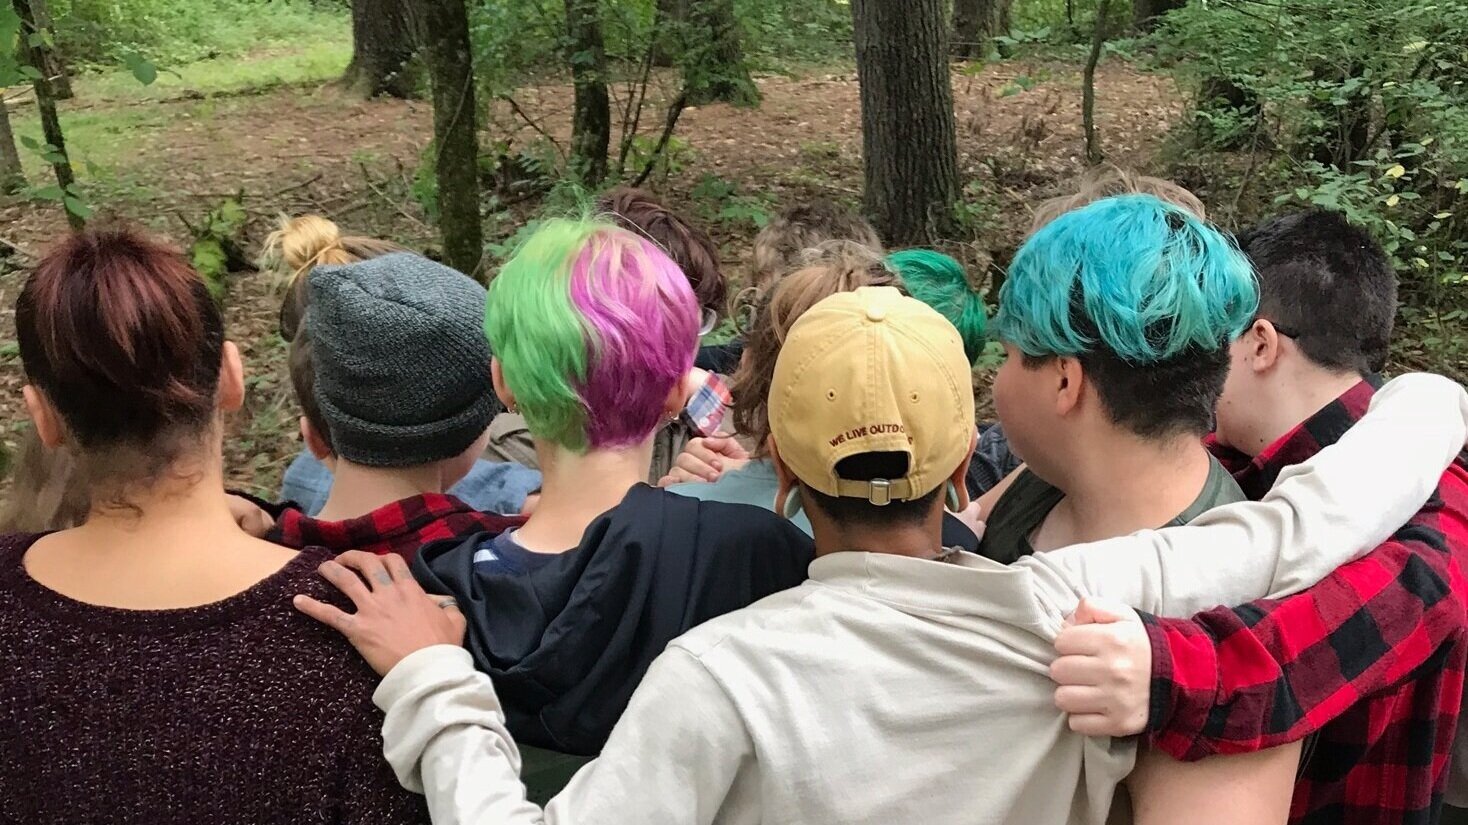  A group of seven teens are clustered together facing away from the camera. One individual is seen facing the camera between the shoulders of the teens. This individual is looking at their wrist. 